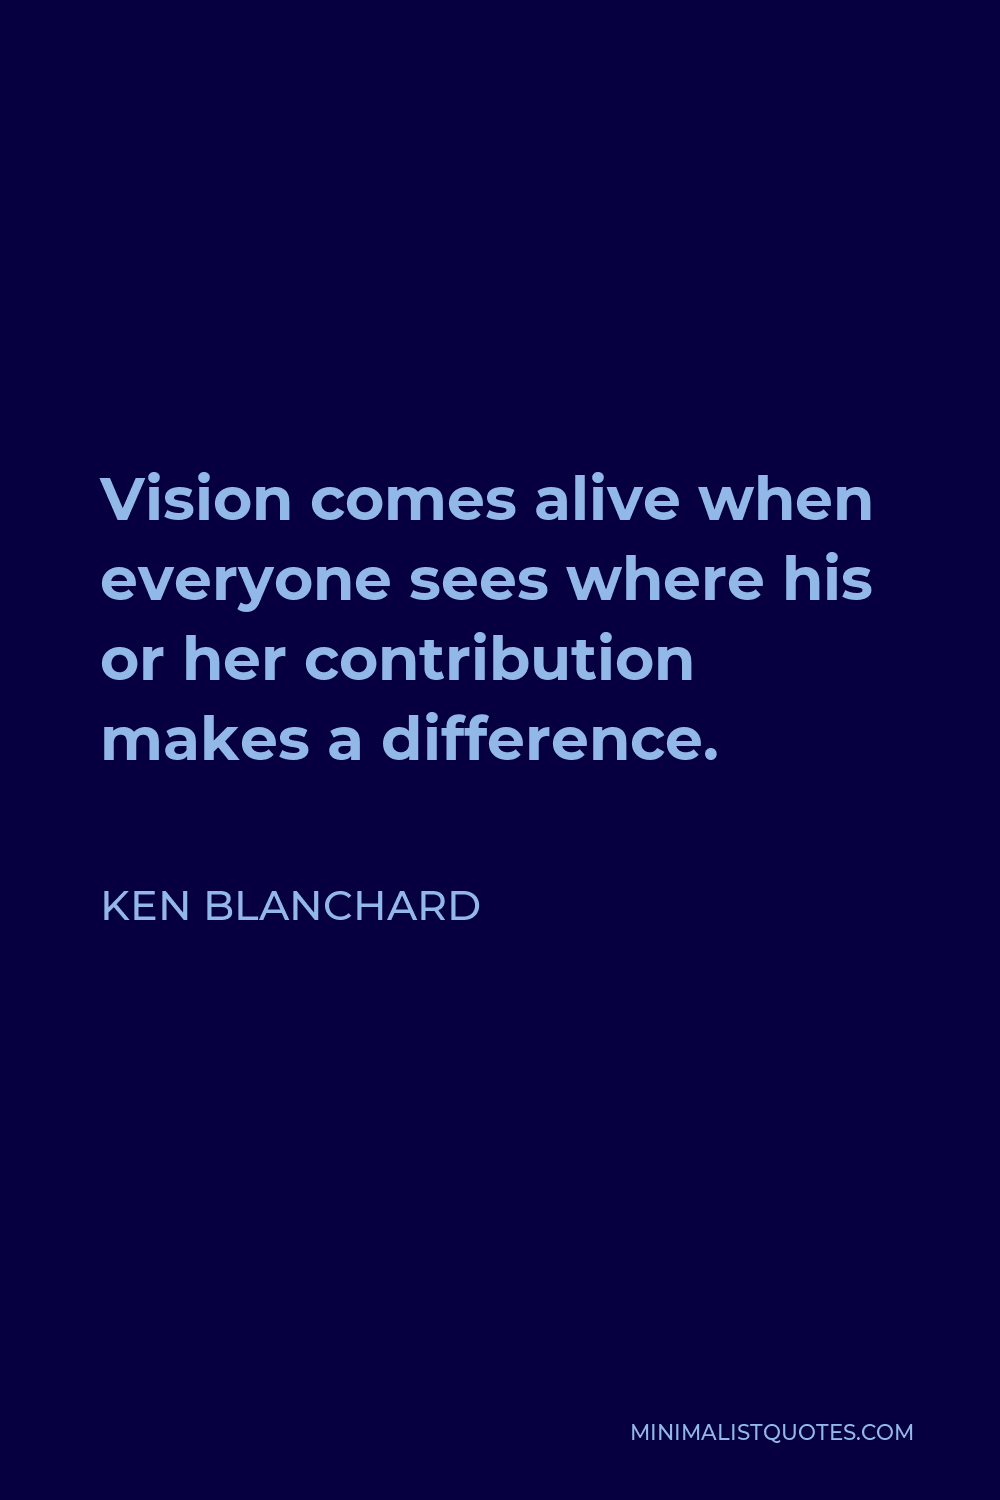 Ken Blanchard Quote - Vision comes alive when everyone sees where his or her contribution makes a difference.